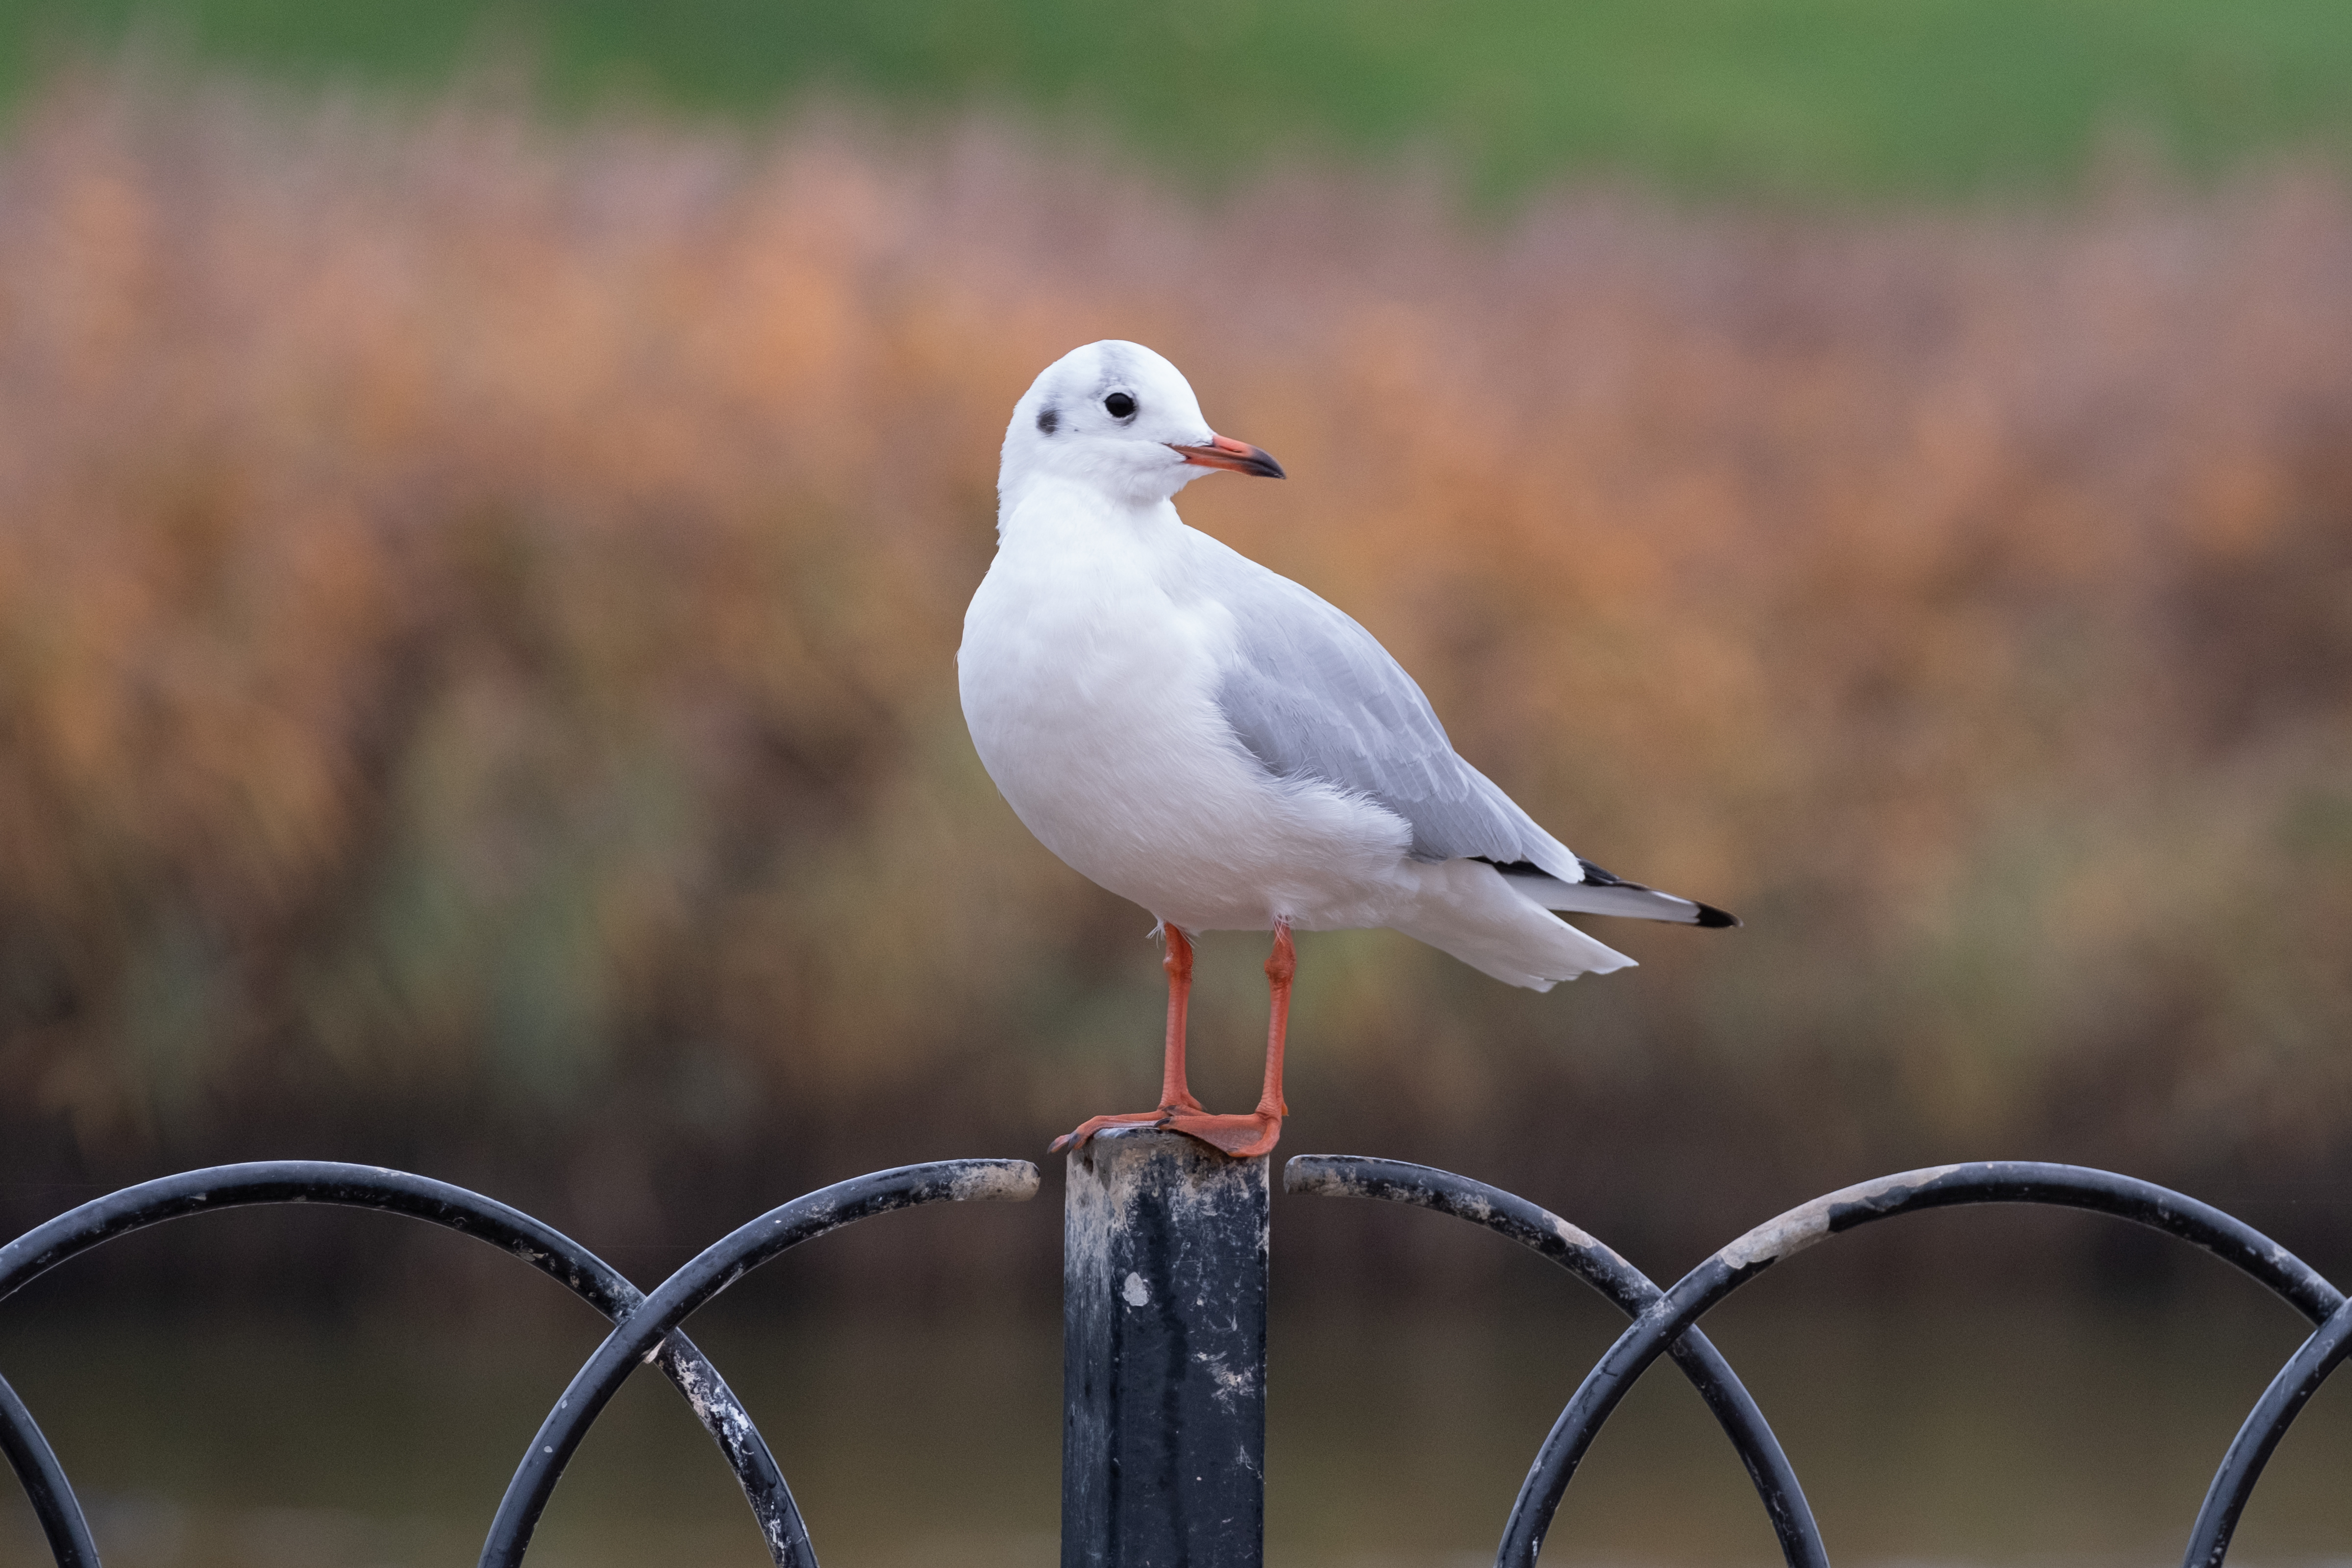 A seagull sitting on a metal fence